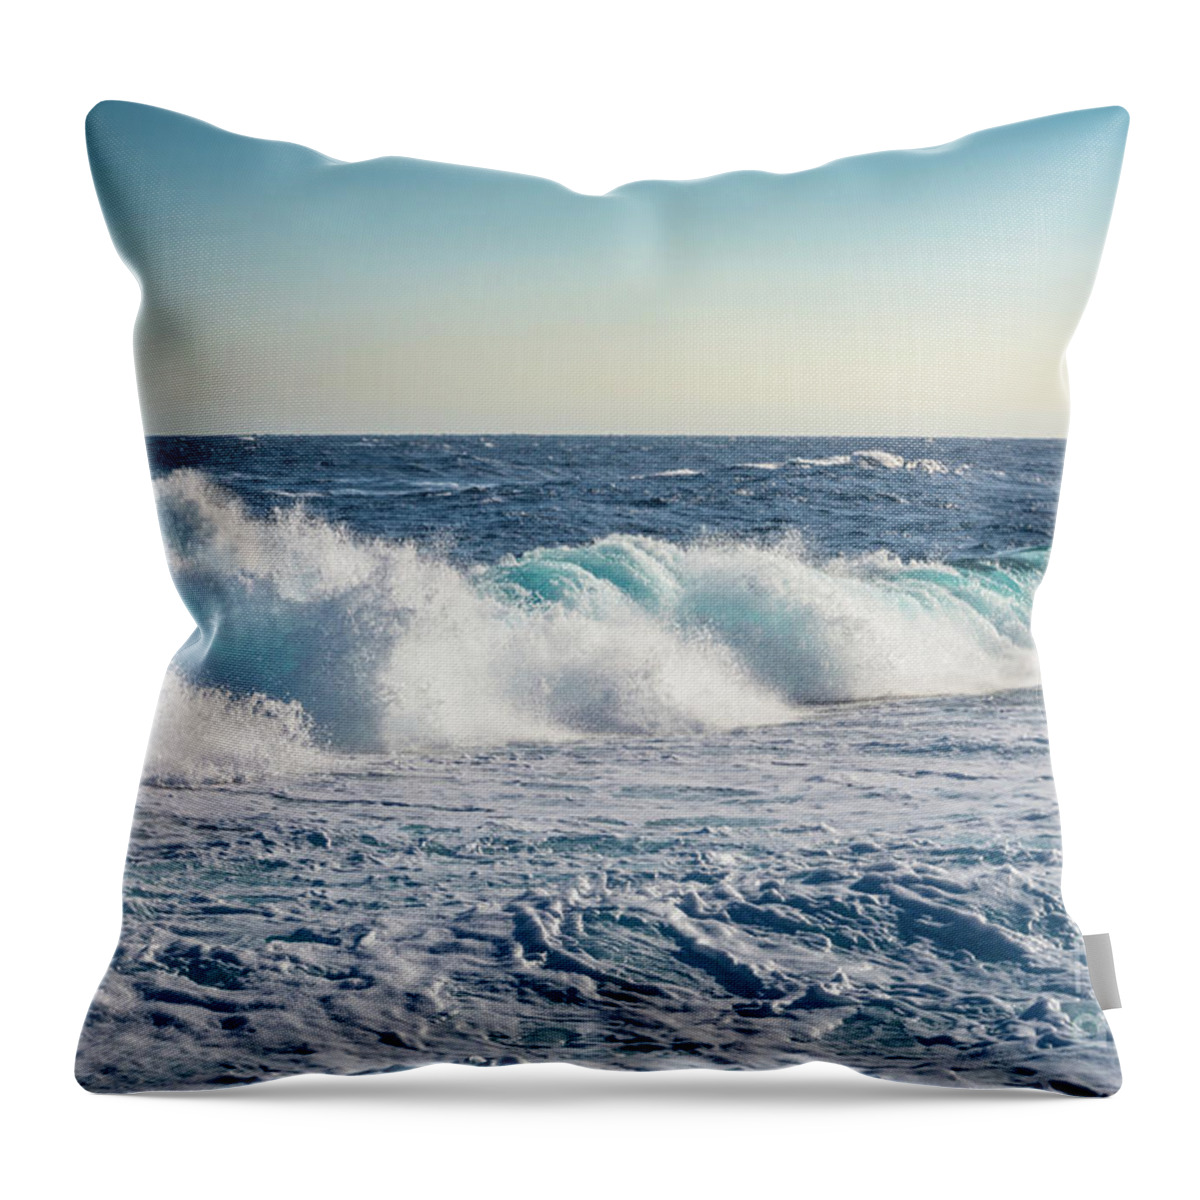 Africa Throw Pillow featuring the photograph Reef Break On The Morning Light by Hannes Cmarits